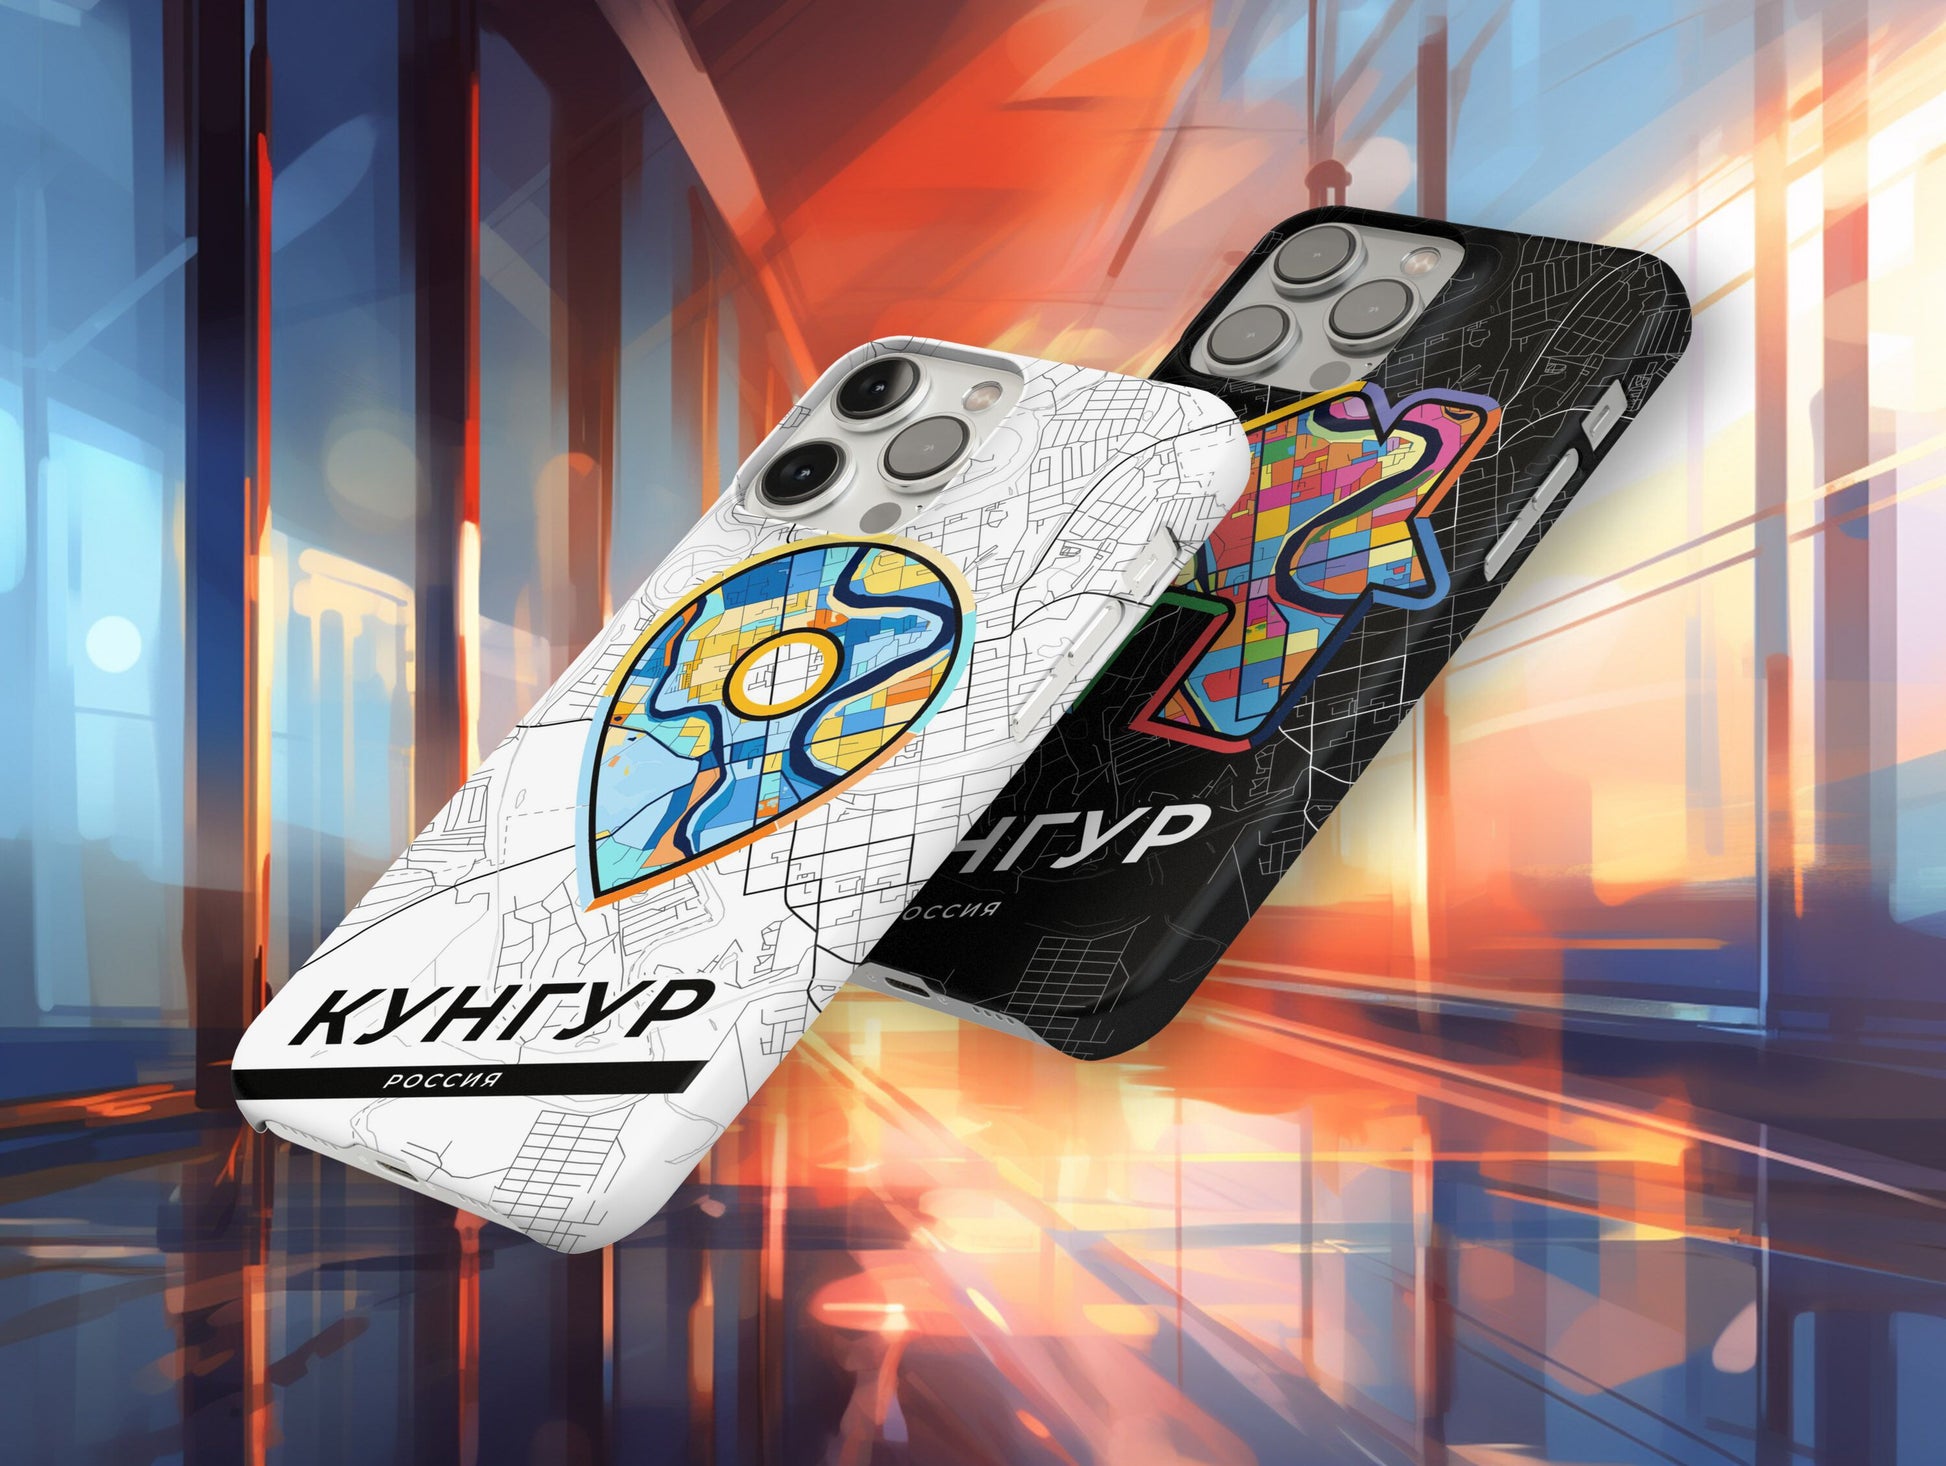 Kungur Russia slim phone case with colorful icon. Birthday, wedding or housewarming gift. Couple match cases.